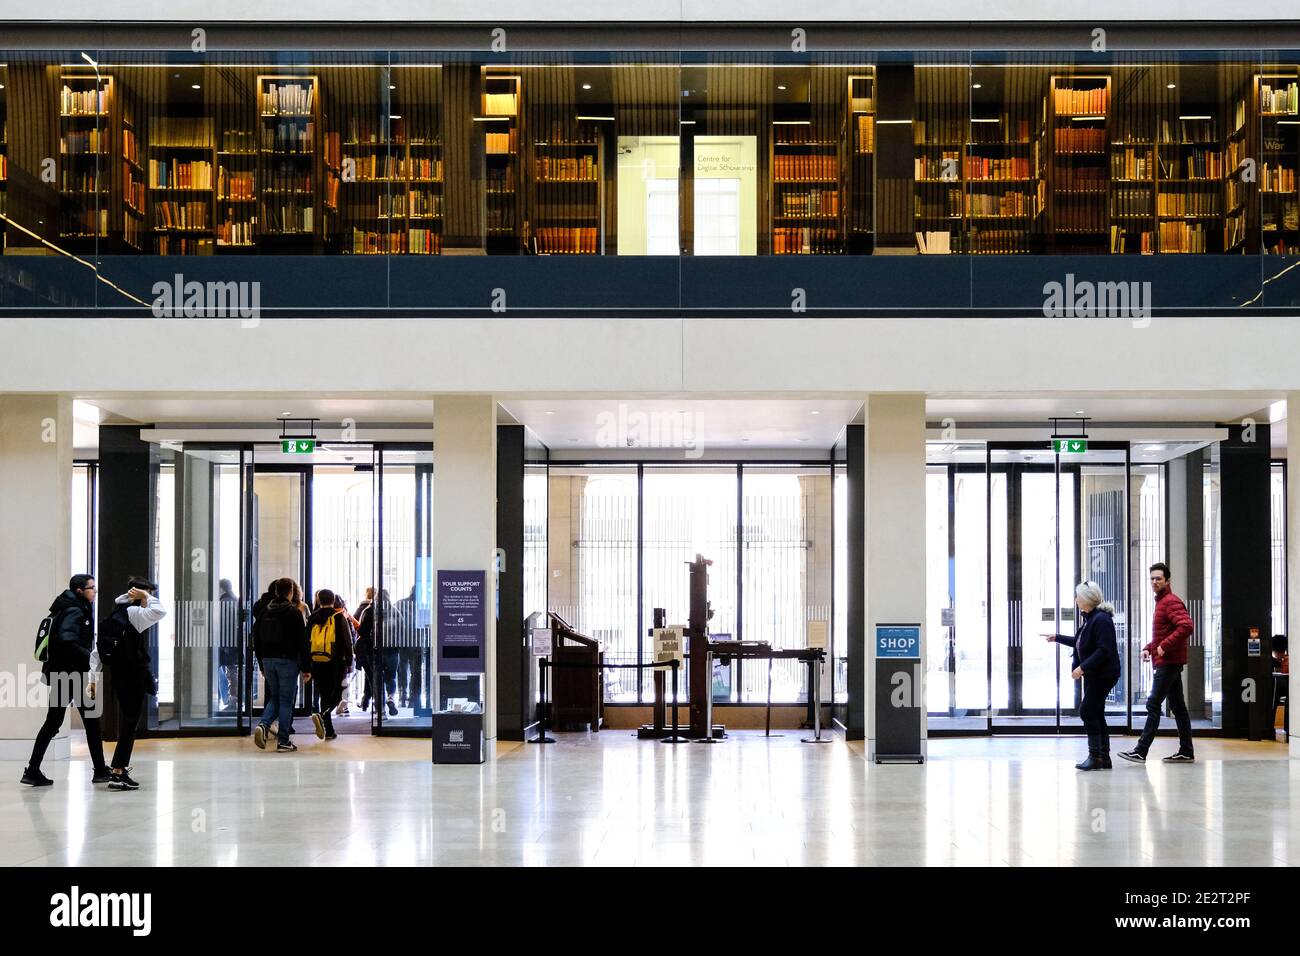 Inside The Weston Library at Oxford University. Stock Photo